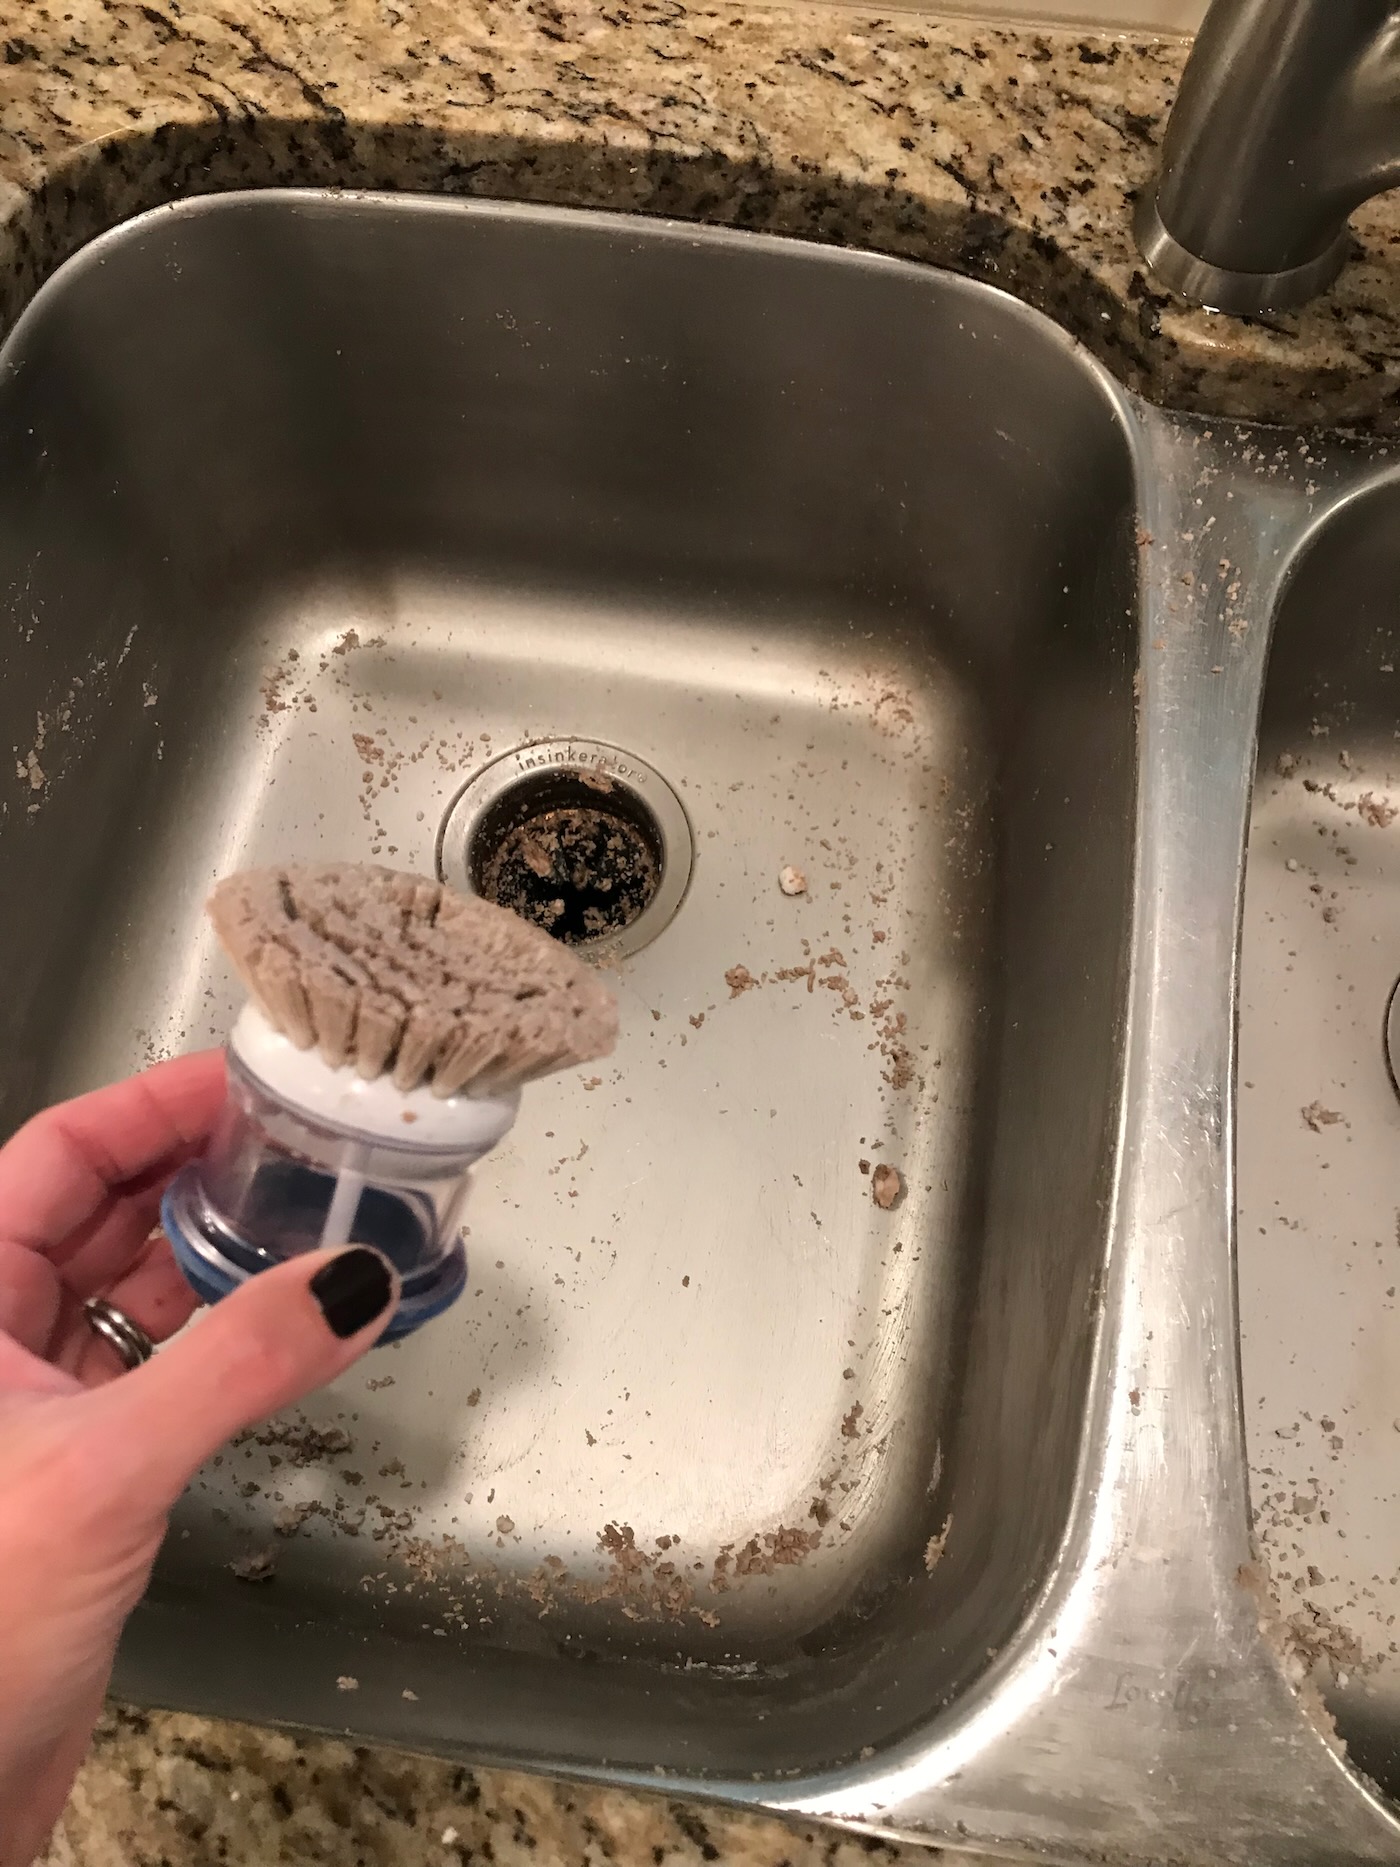 A Housekeeper Advises Using This to Clean Your Stainless-Steel Sink –  LifeSavvy